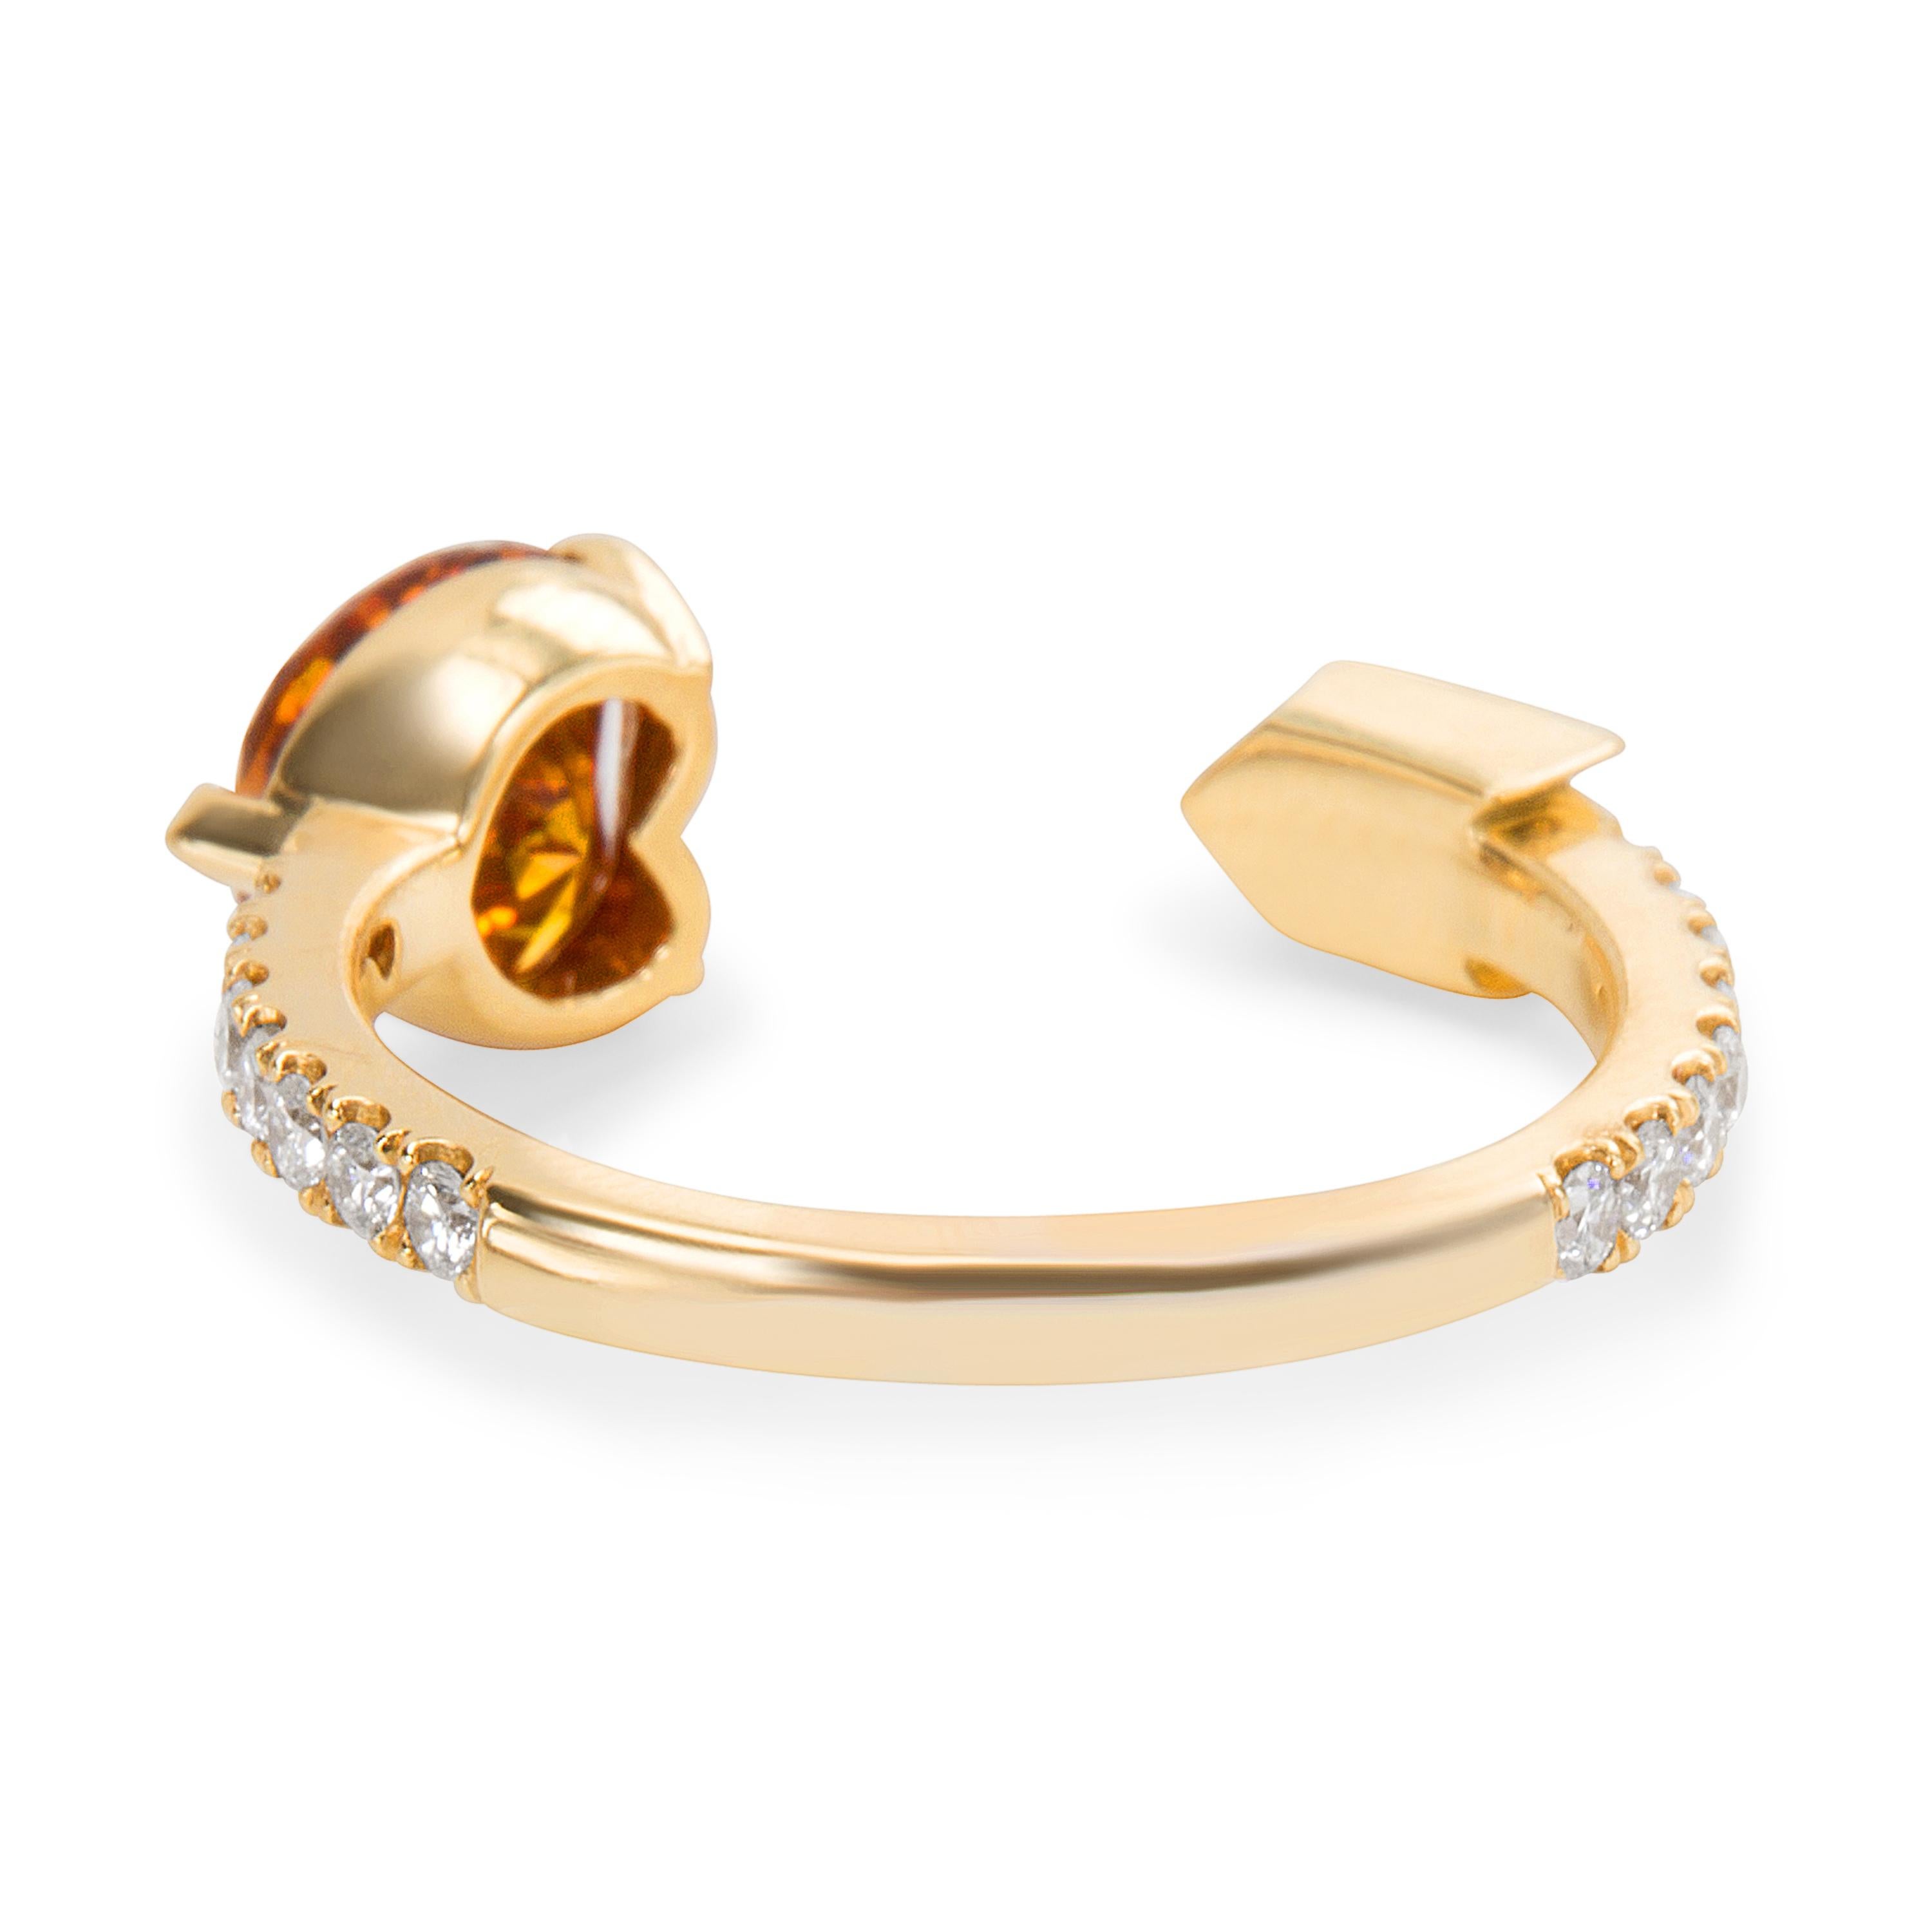 The simple 18K yellow gold setting, encrusted on most of its outer rim with small stones is simple and elegant. Its focal point though is the fancy yellow and orange diamond, fashioned into the shape of the diamond, adding a unique and statement